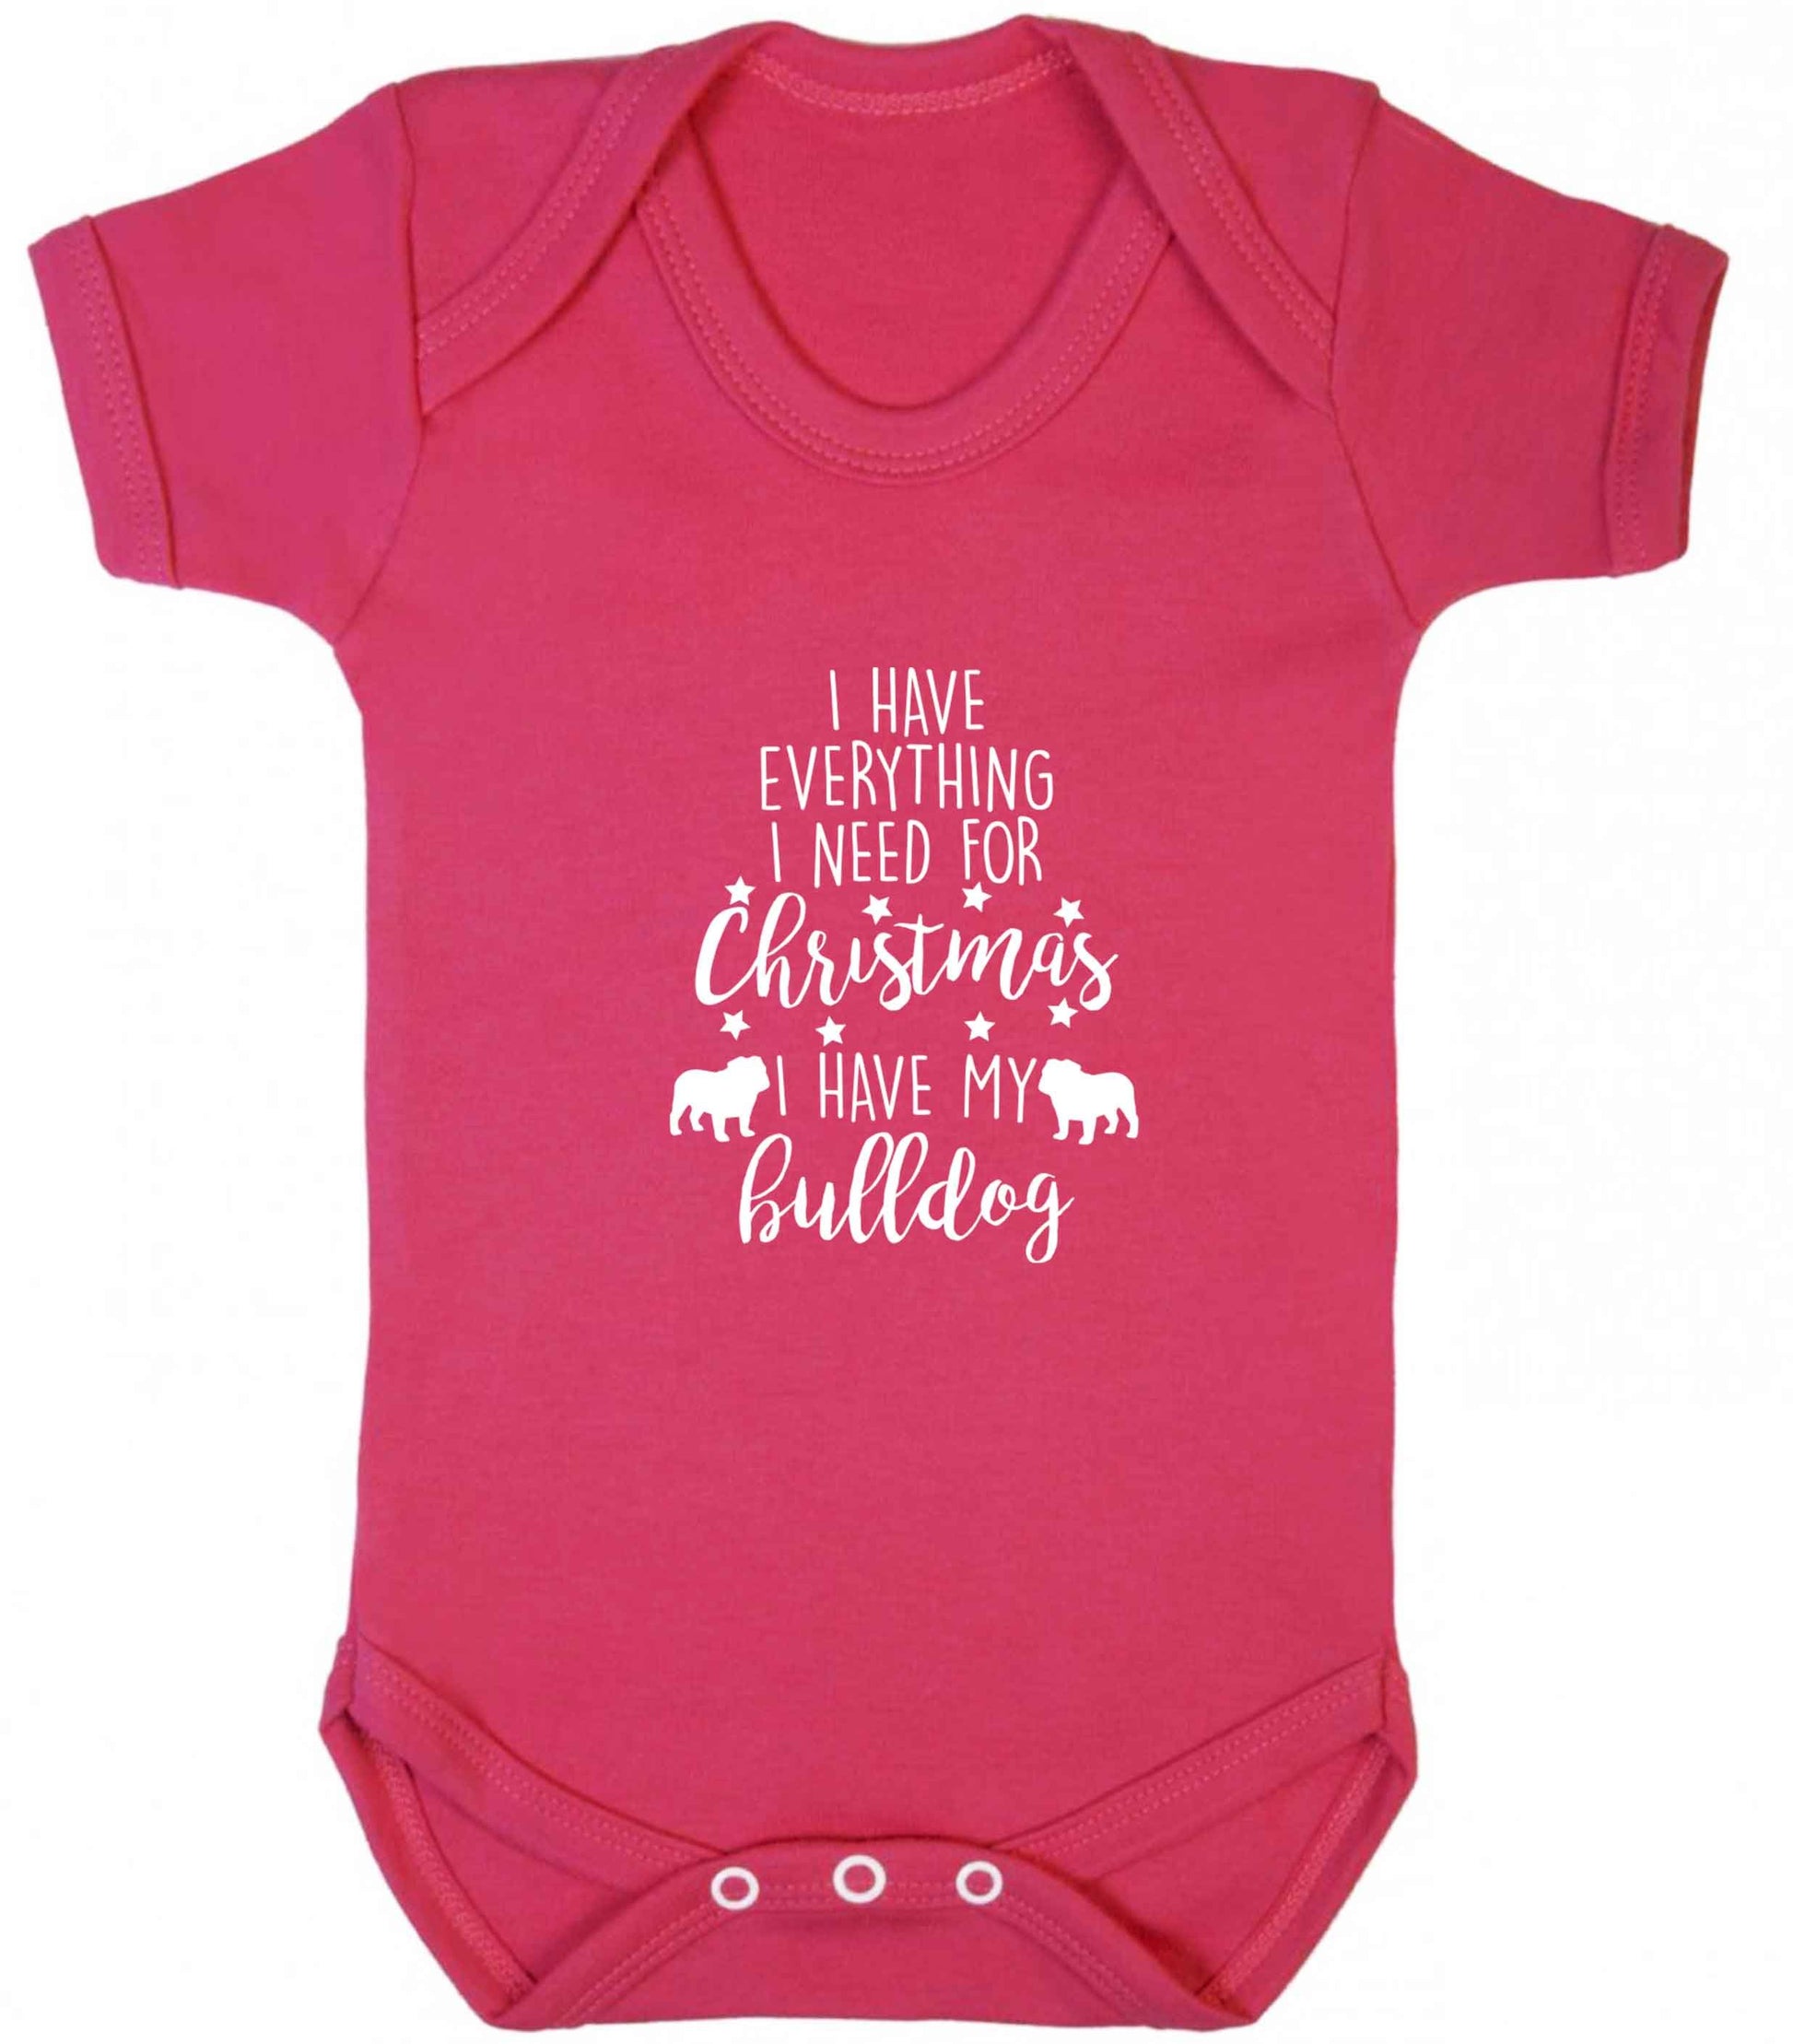 I have everything I need for Christmas I have my bulldog baby vest dark pink 18-24 months